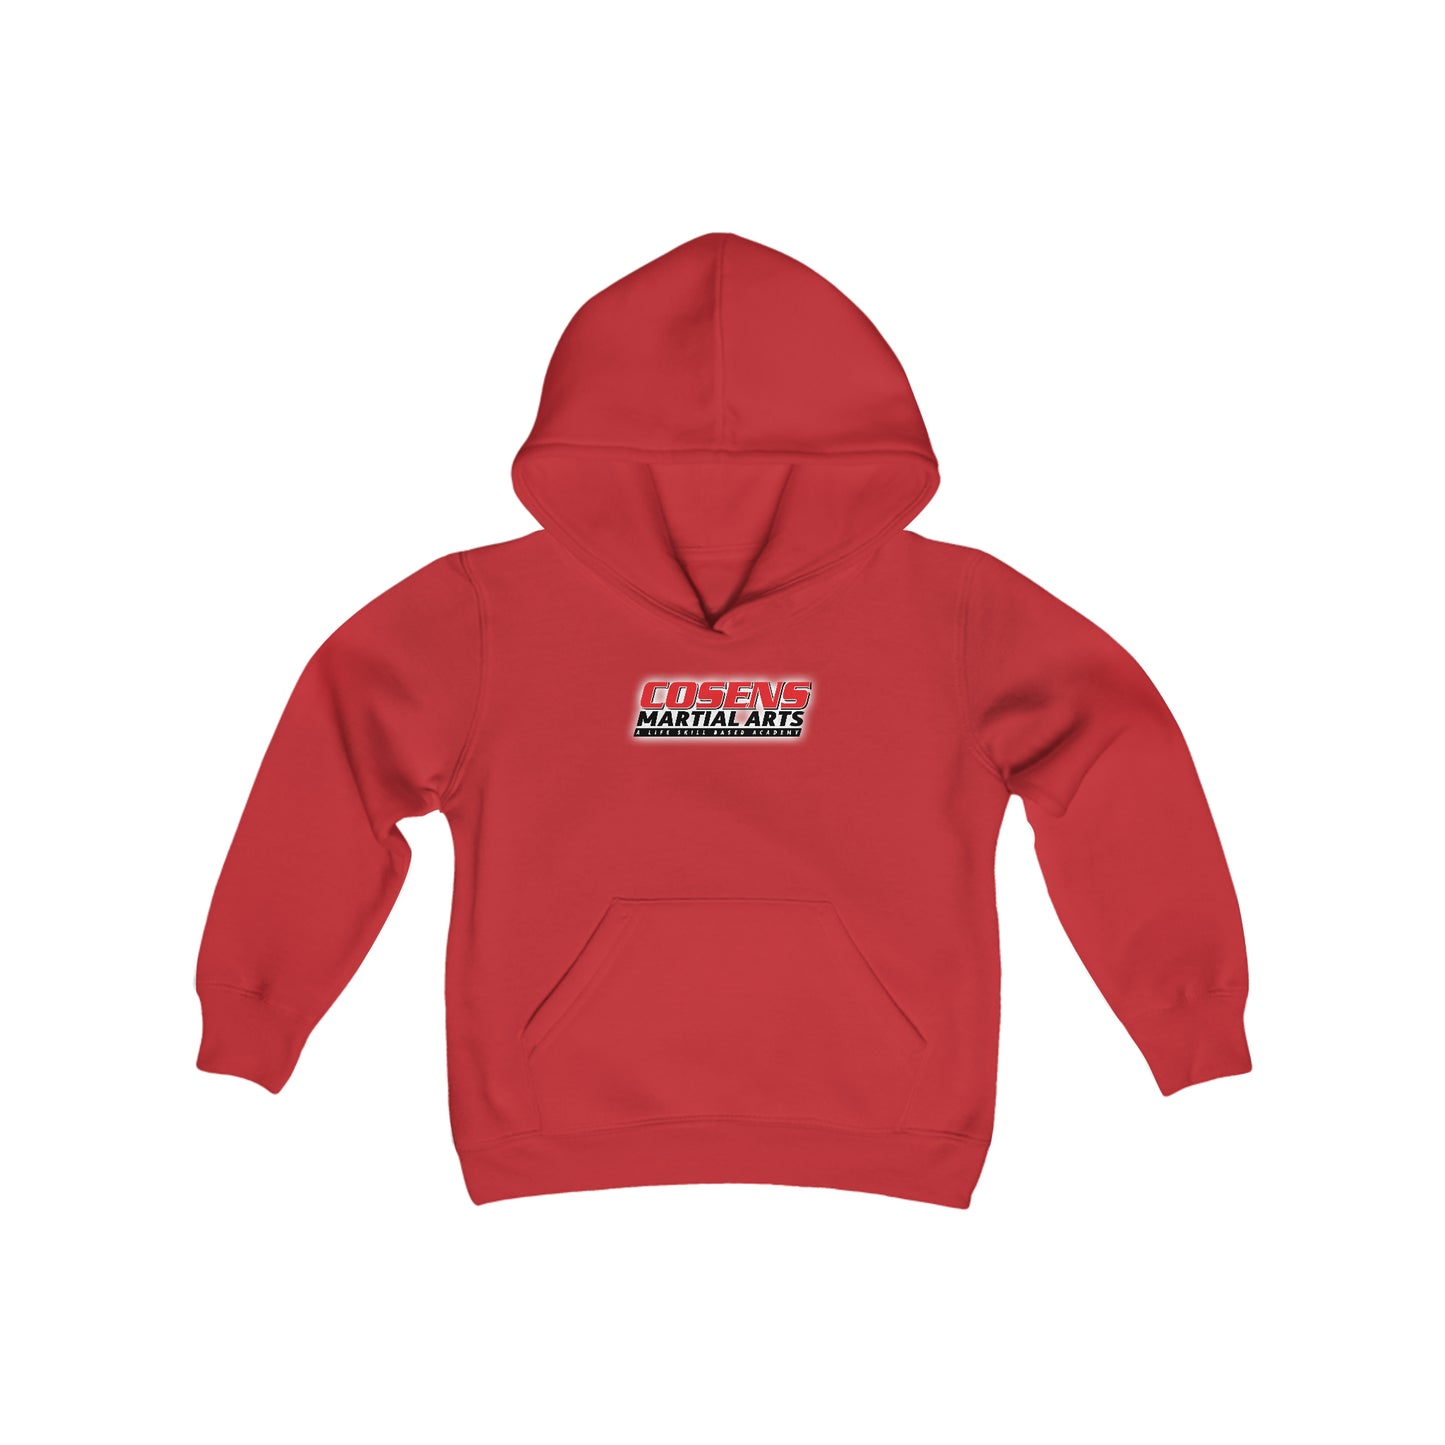 Youth Pullover Sweatshirt (Not customized with name)